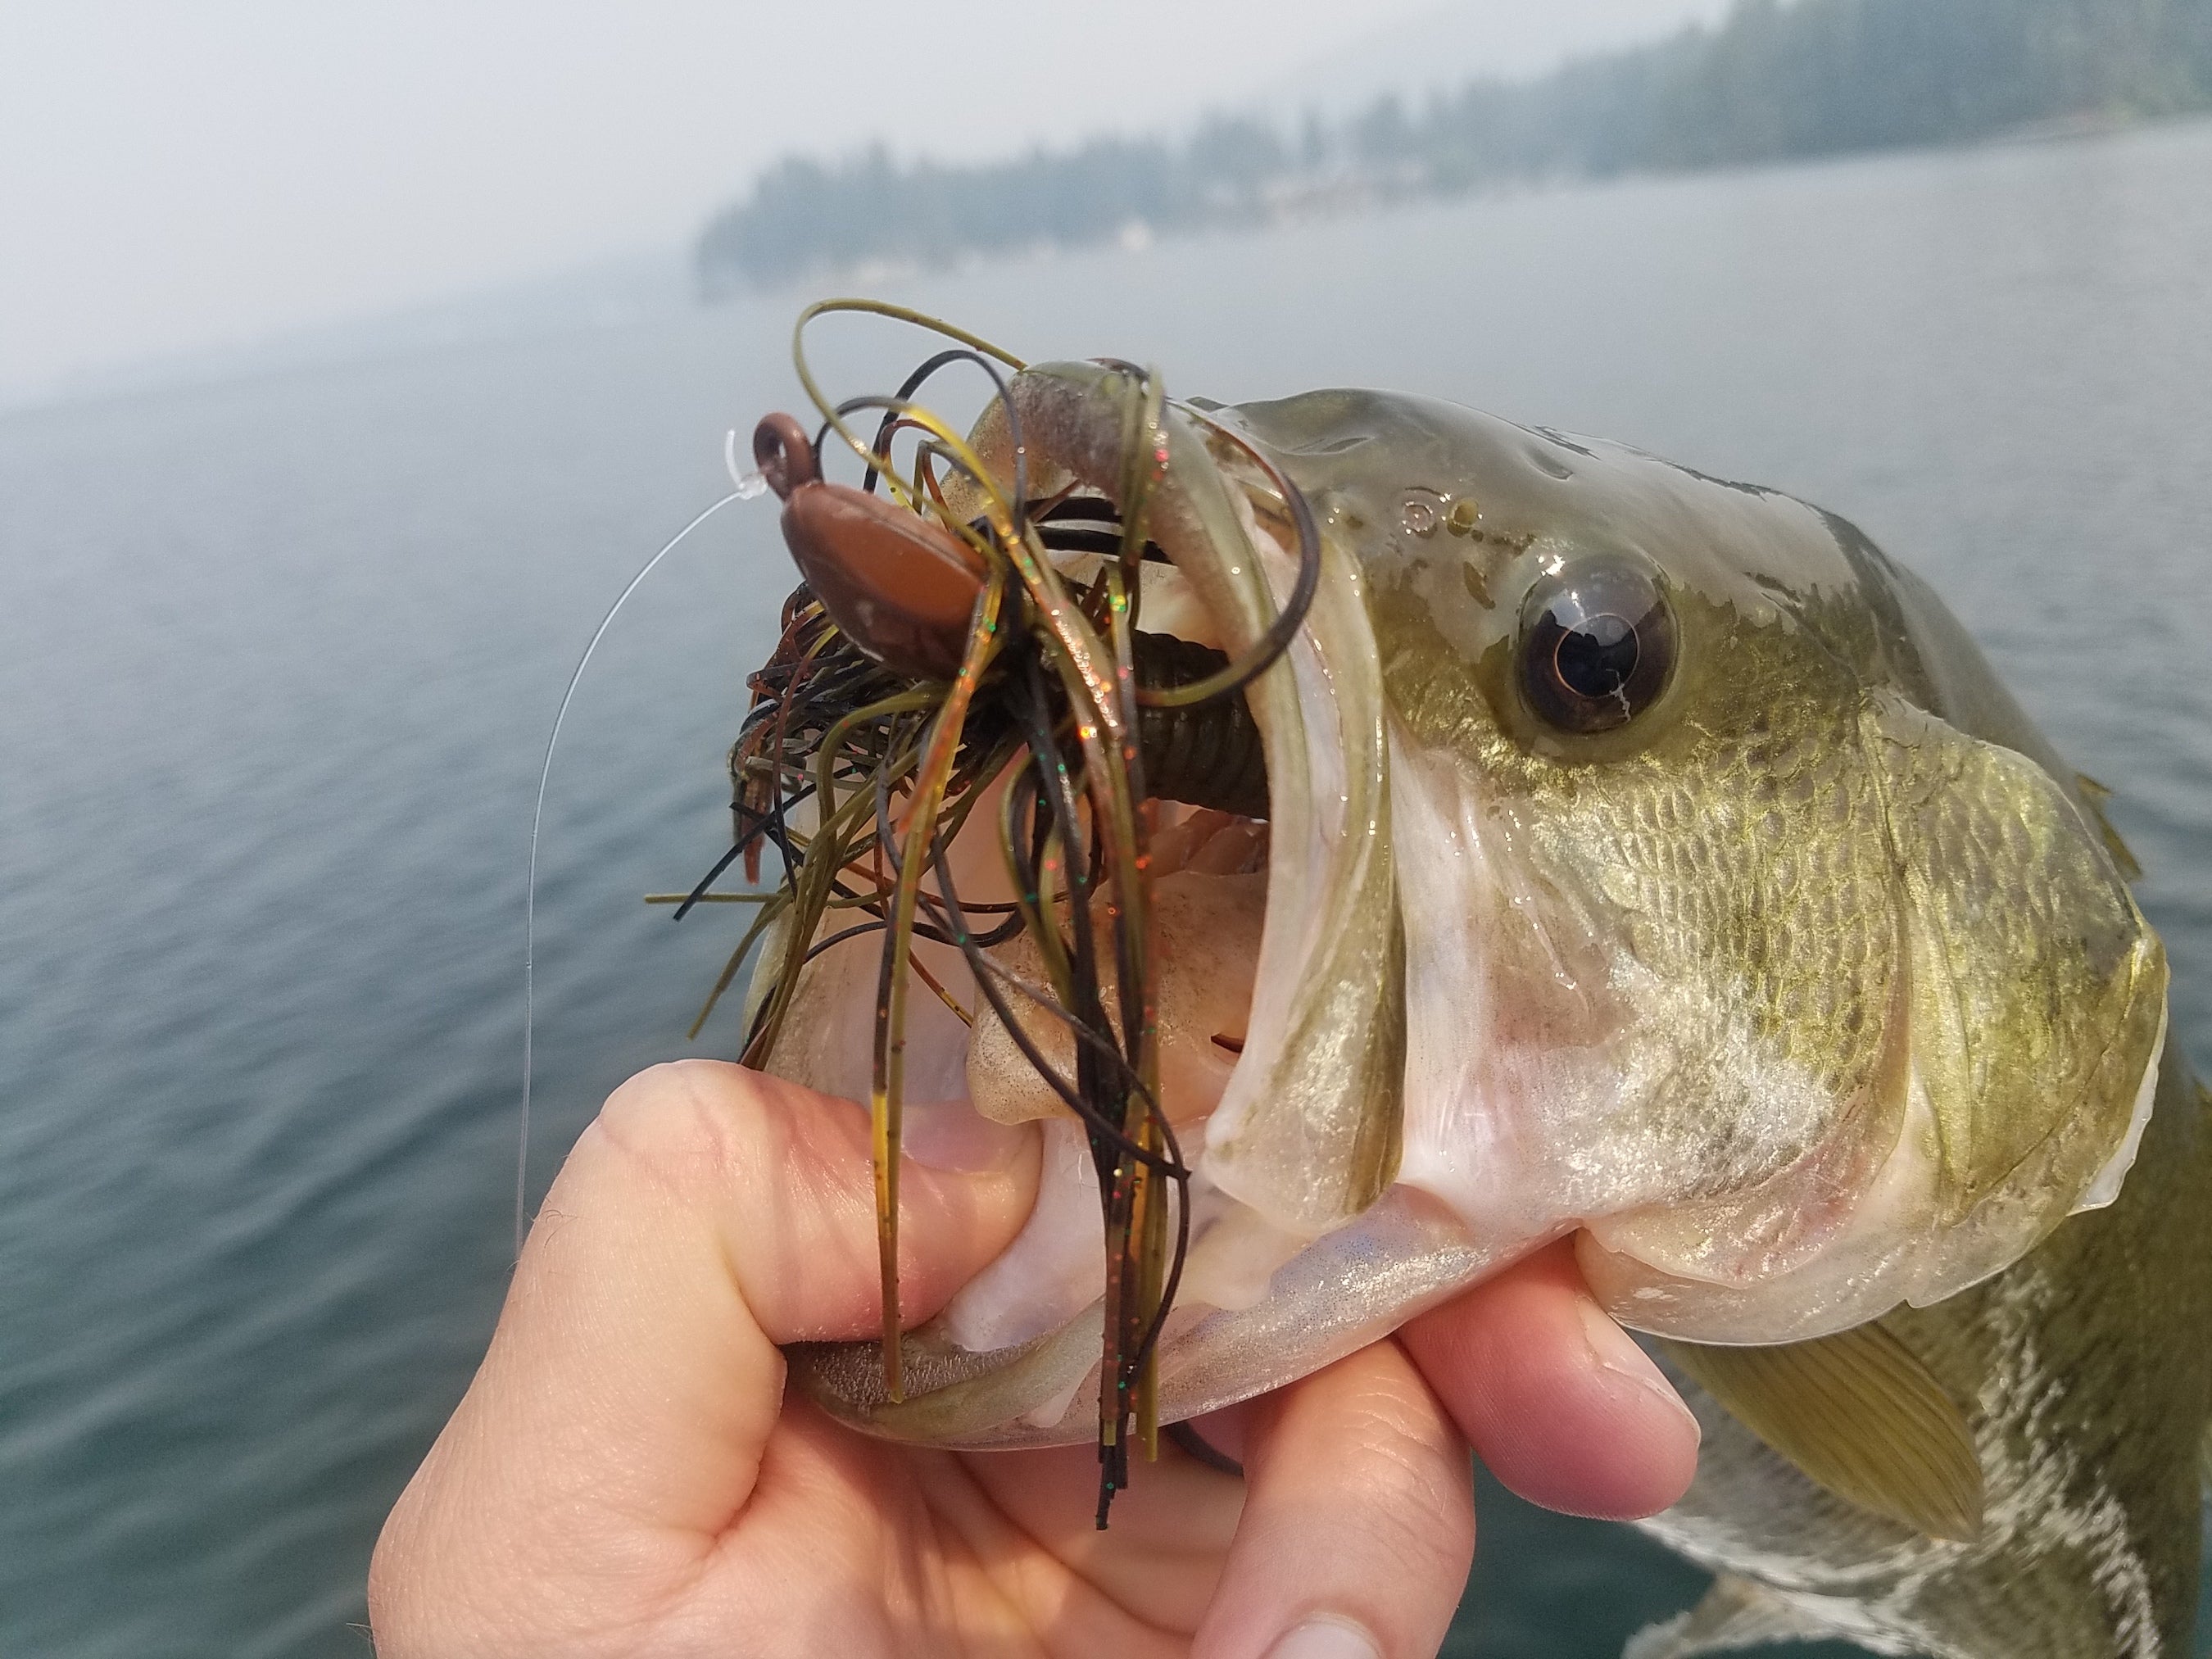 Choose the best freshwater fishing lures by fish species